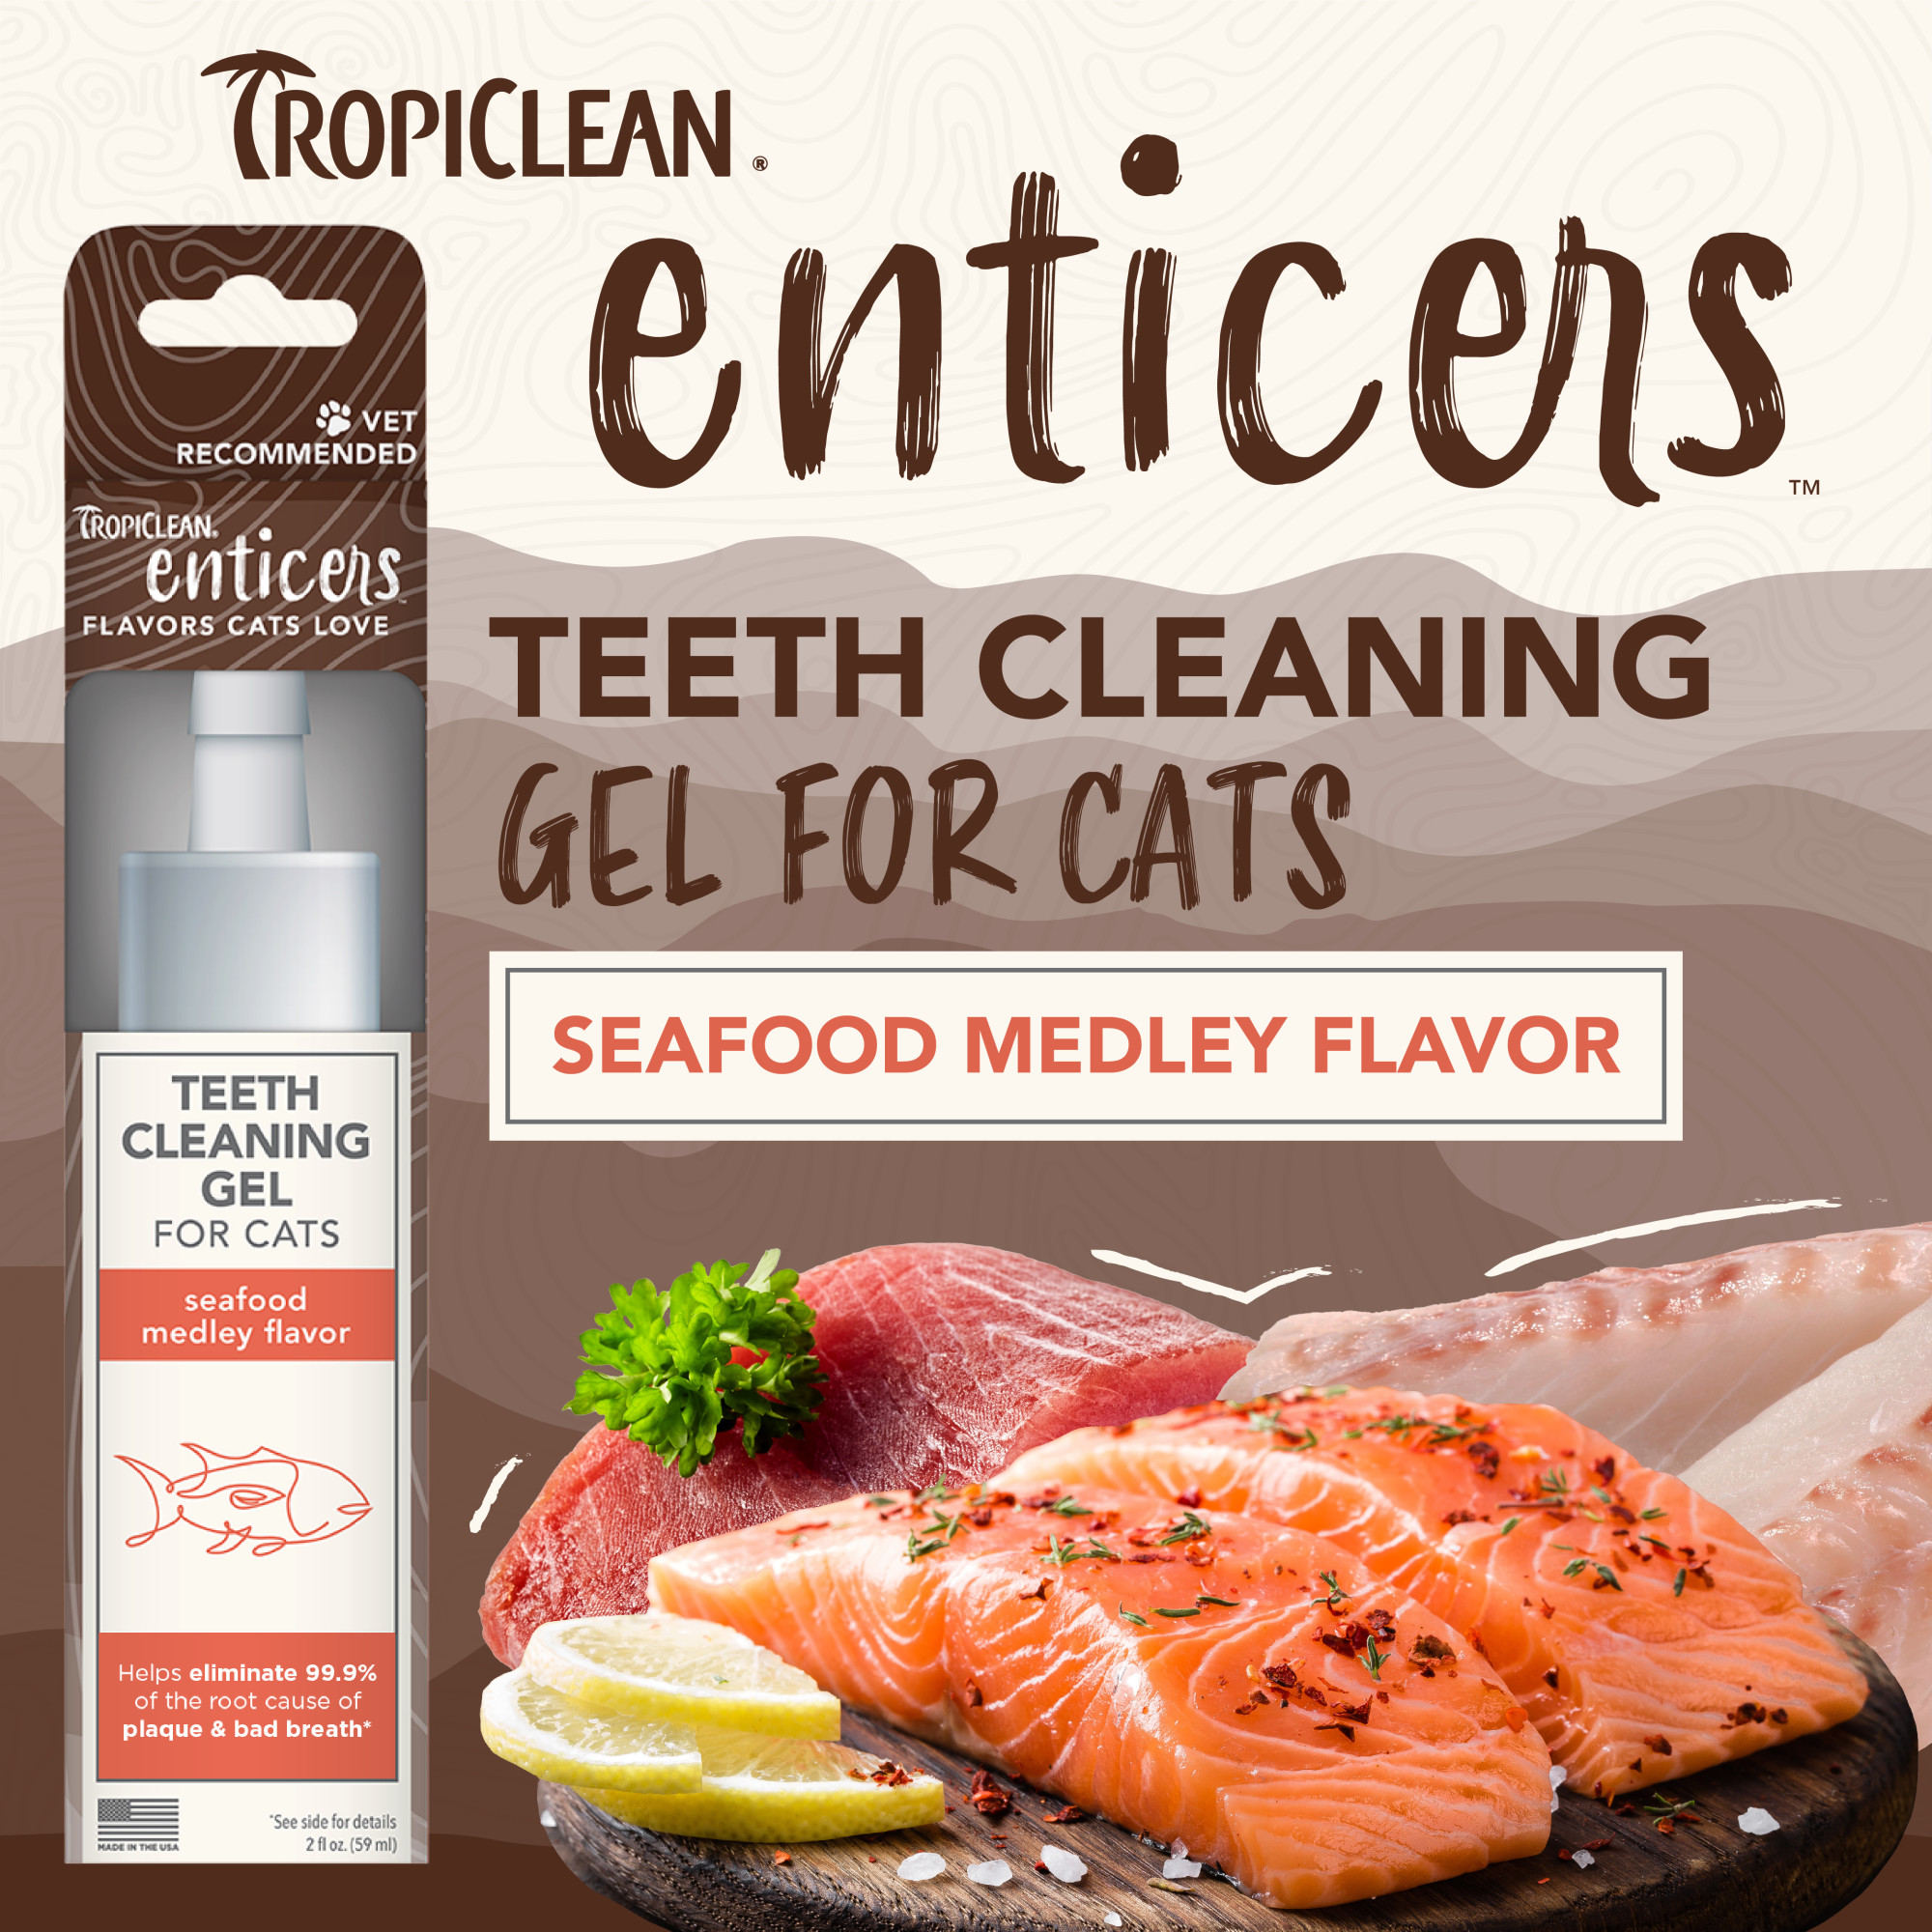 Teeth Cleaning Gel for Cats – Seafood Medley Flavor